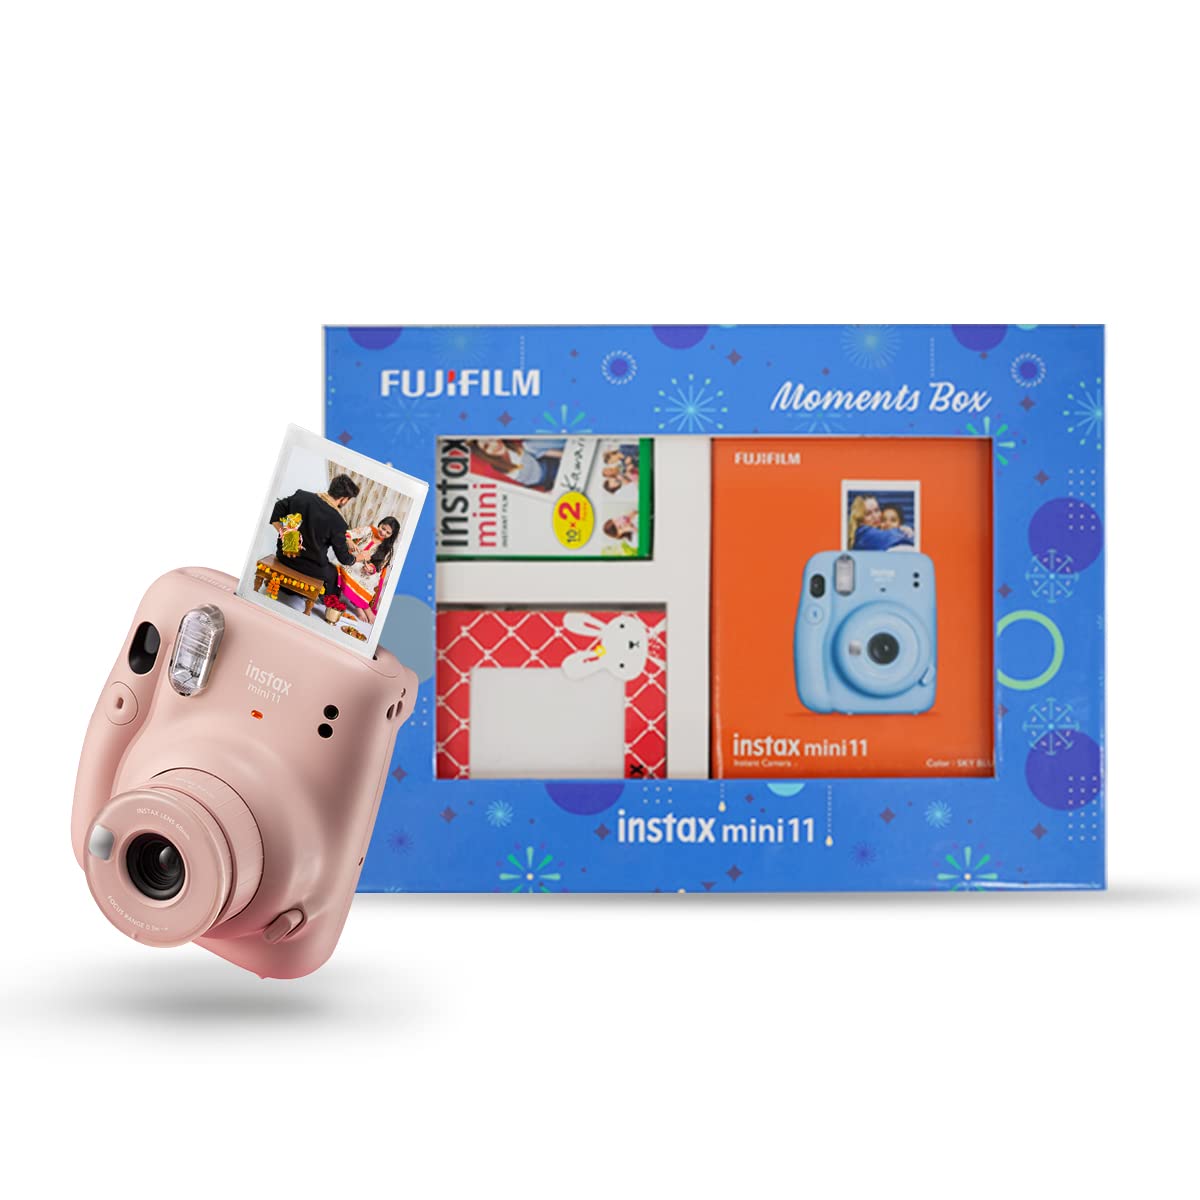 Fujifilm Instax Mini 11 Moments Forever With 20 Shots Instant Camera Pink Colour